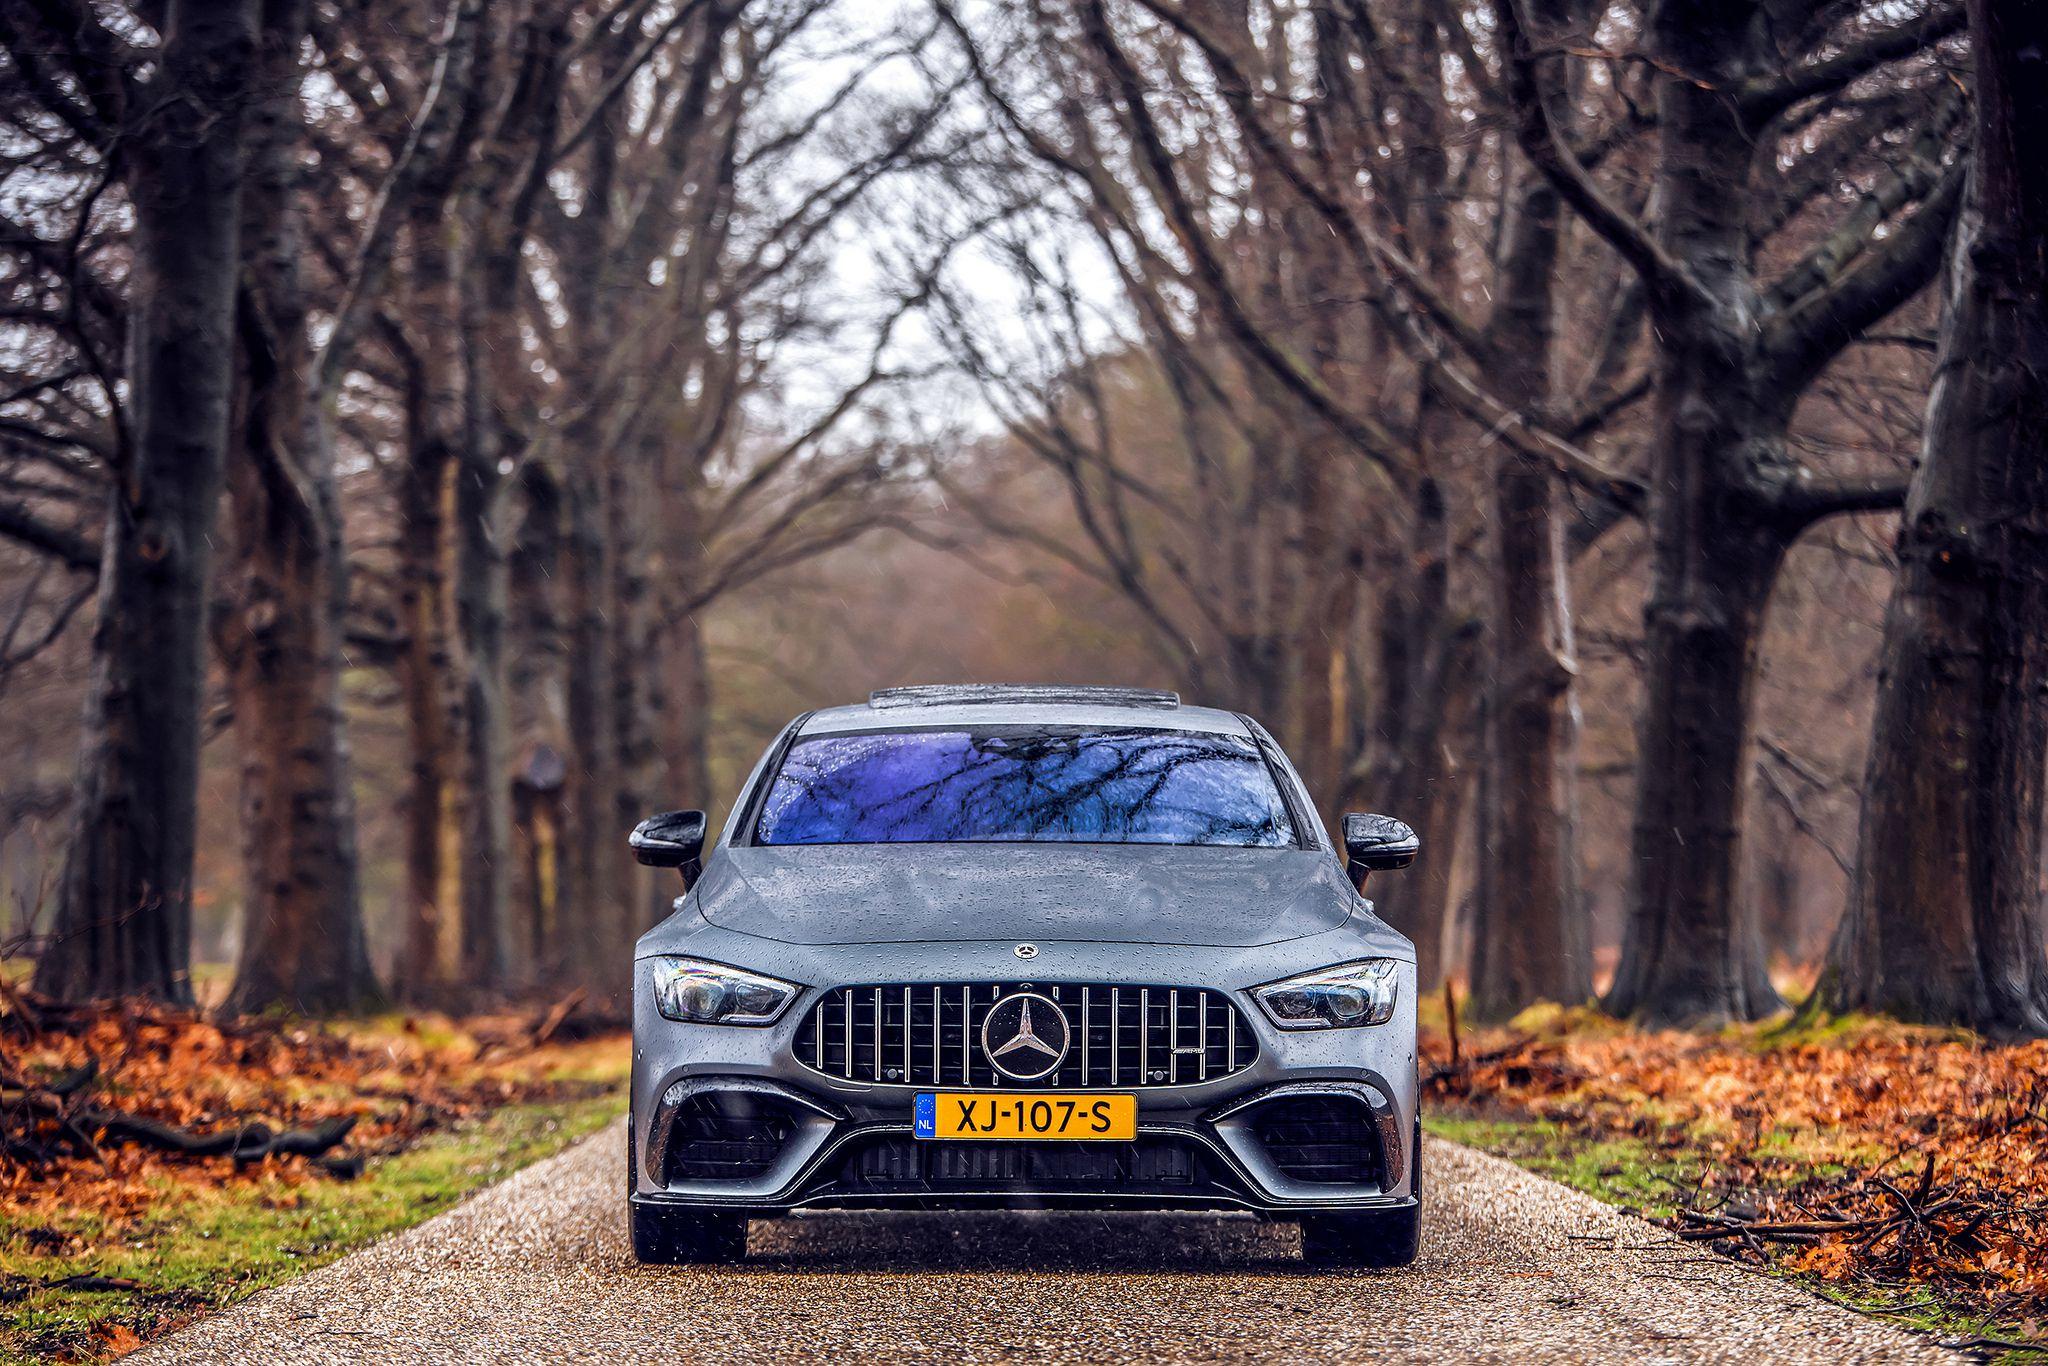 Mercedes Benz AMG GT 63 S High Quality Image